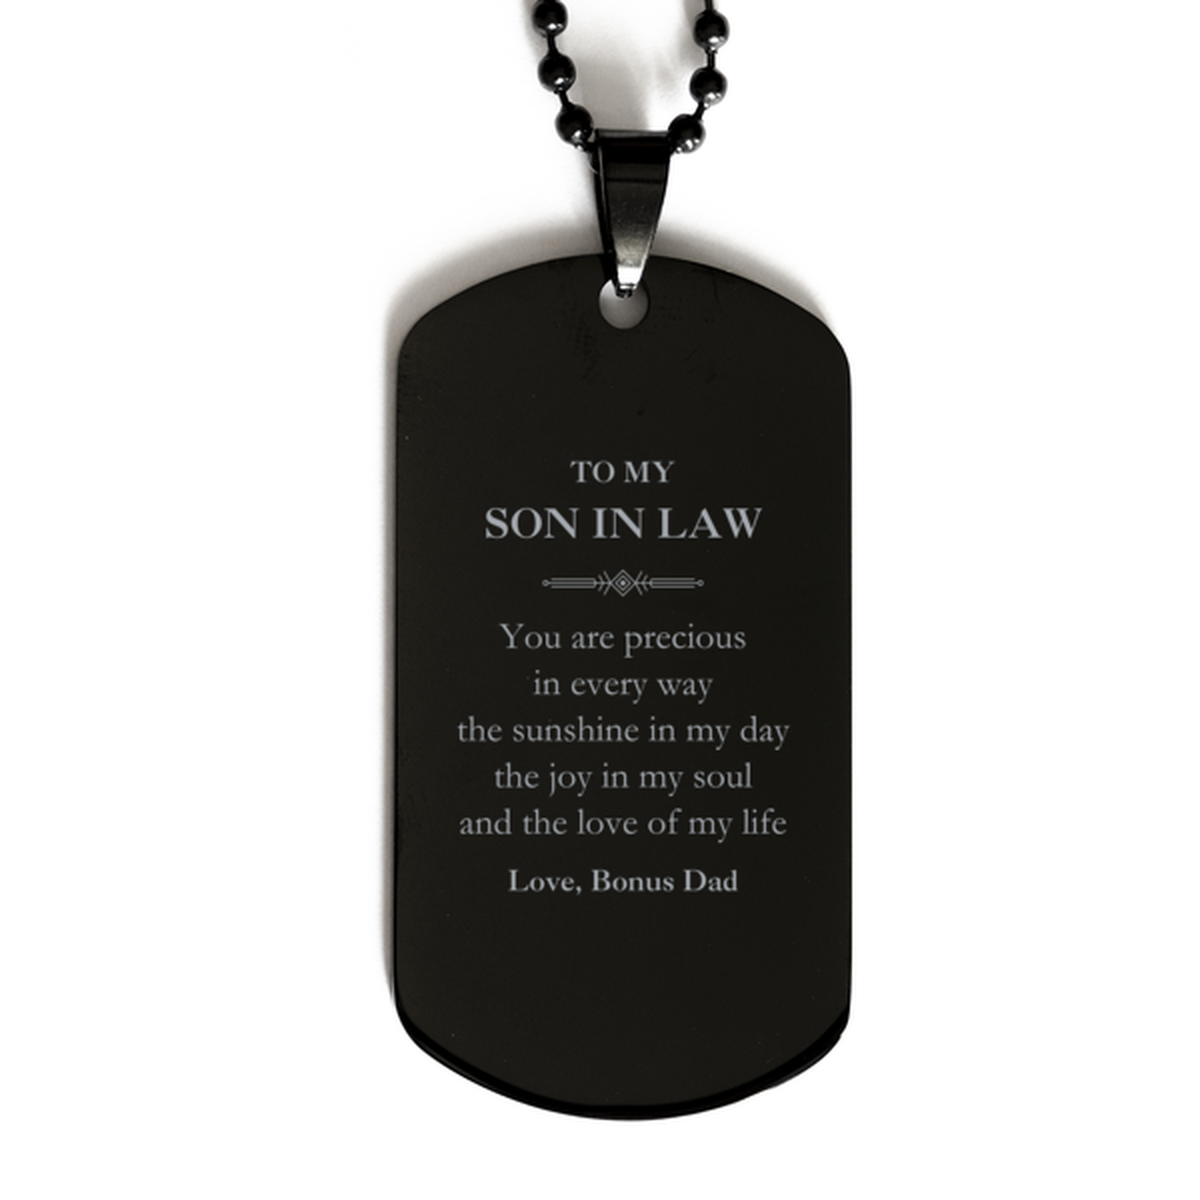 Graduation Gifts for Son In Law Black Dog Tag Present from Bonus Dad, Christmas Son In Law Birthday Gifts Son In Law You are precious in every way the sunshine in my day. Love, Bonus Dad